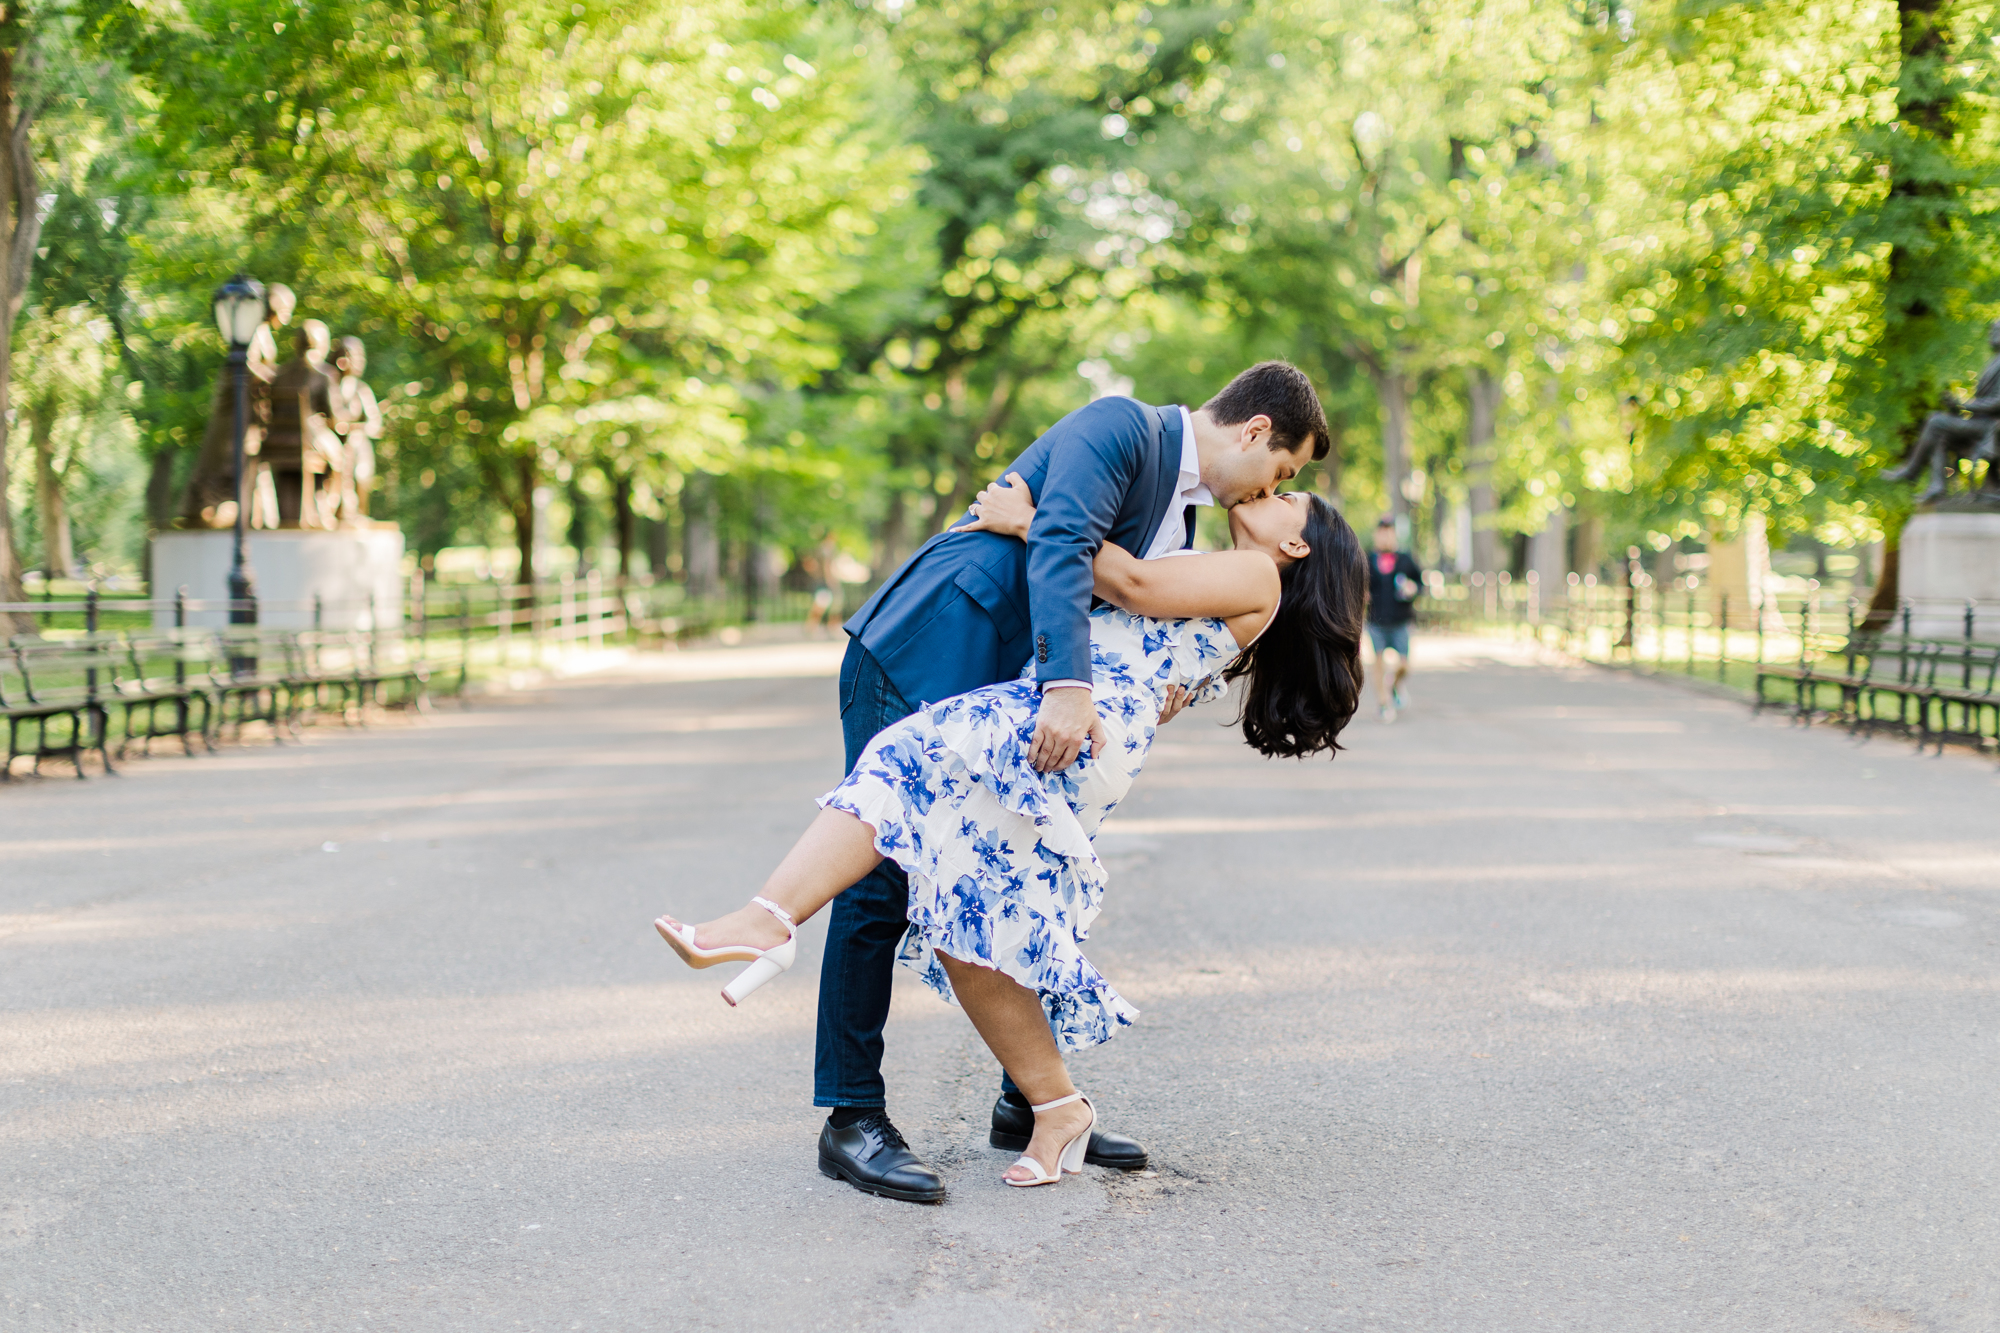 Cheerful Central Park Engagement Photography